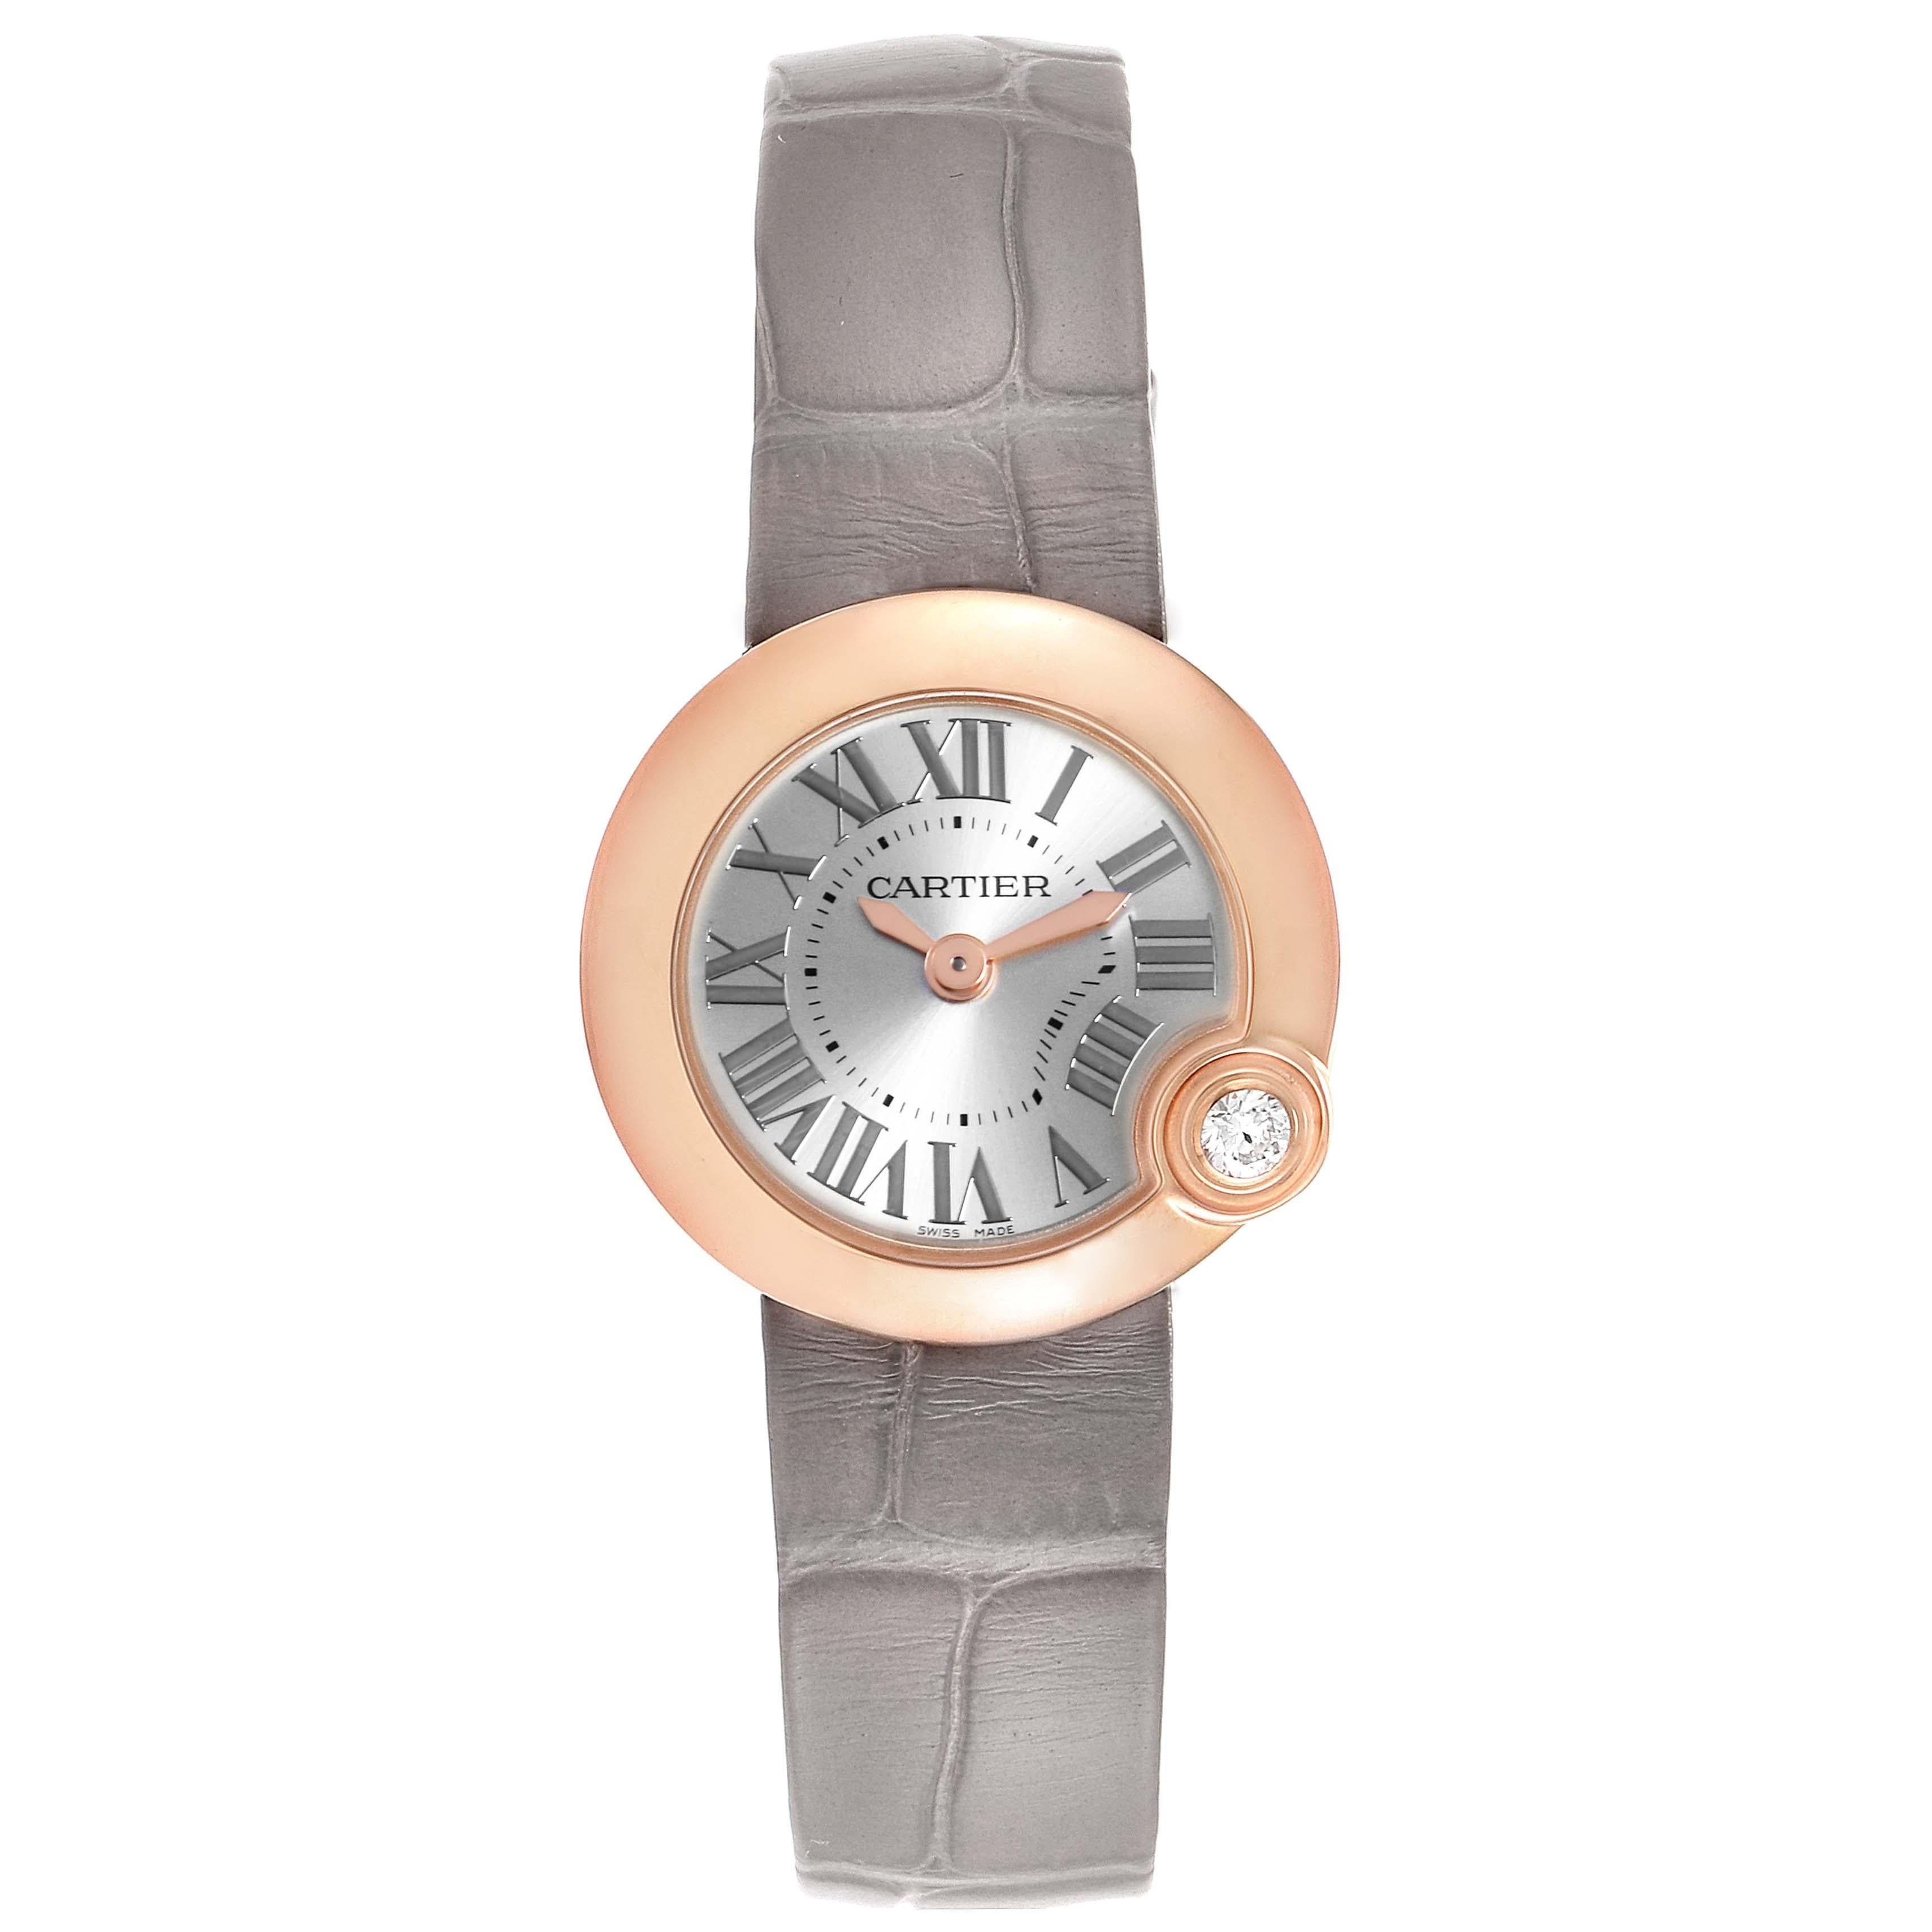 Cartier Ballon Blanc Rose Gold Diamond Ladies Watch WGBL0002 Box Card. Quartz movement. 18K rose gold case 26.0 mm in diameter. 18K rose gold bezel with larger solitaire diamond at the 4 o'clock position. Scratch resistant sapphire crystal. Silver